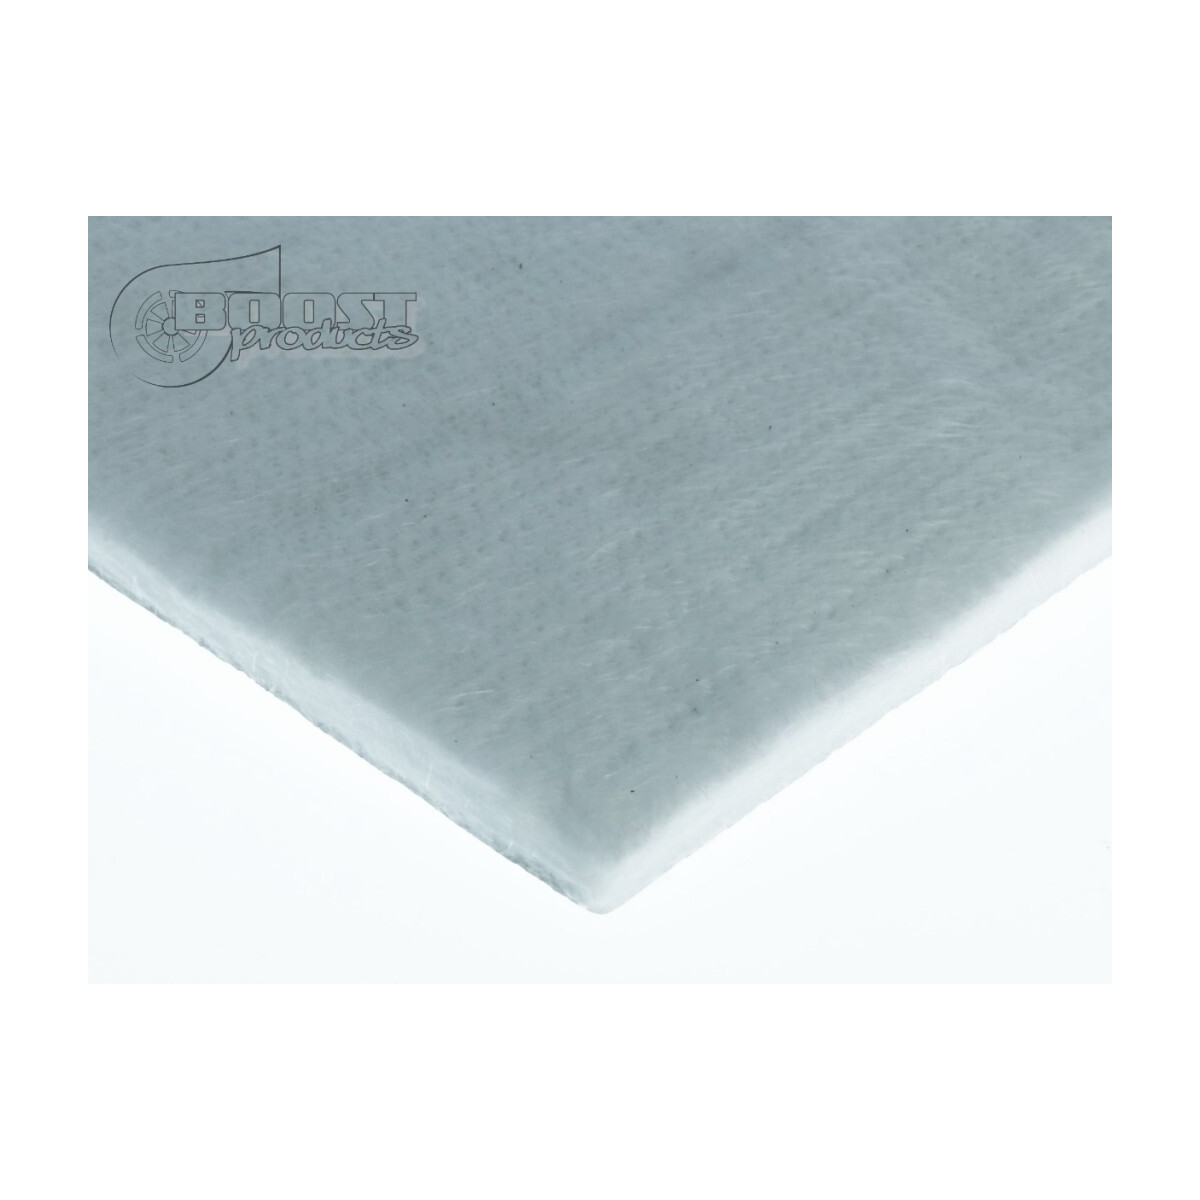 BOOST products Heat Protection - Fiberglass Mat with Aluminum coating 8mm - 30x30cm